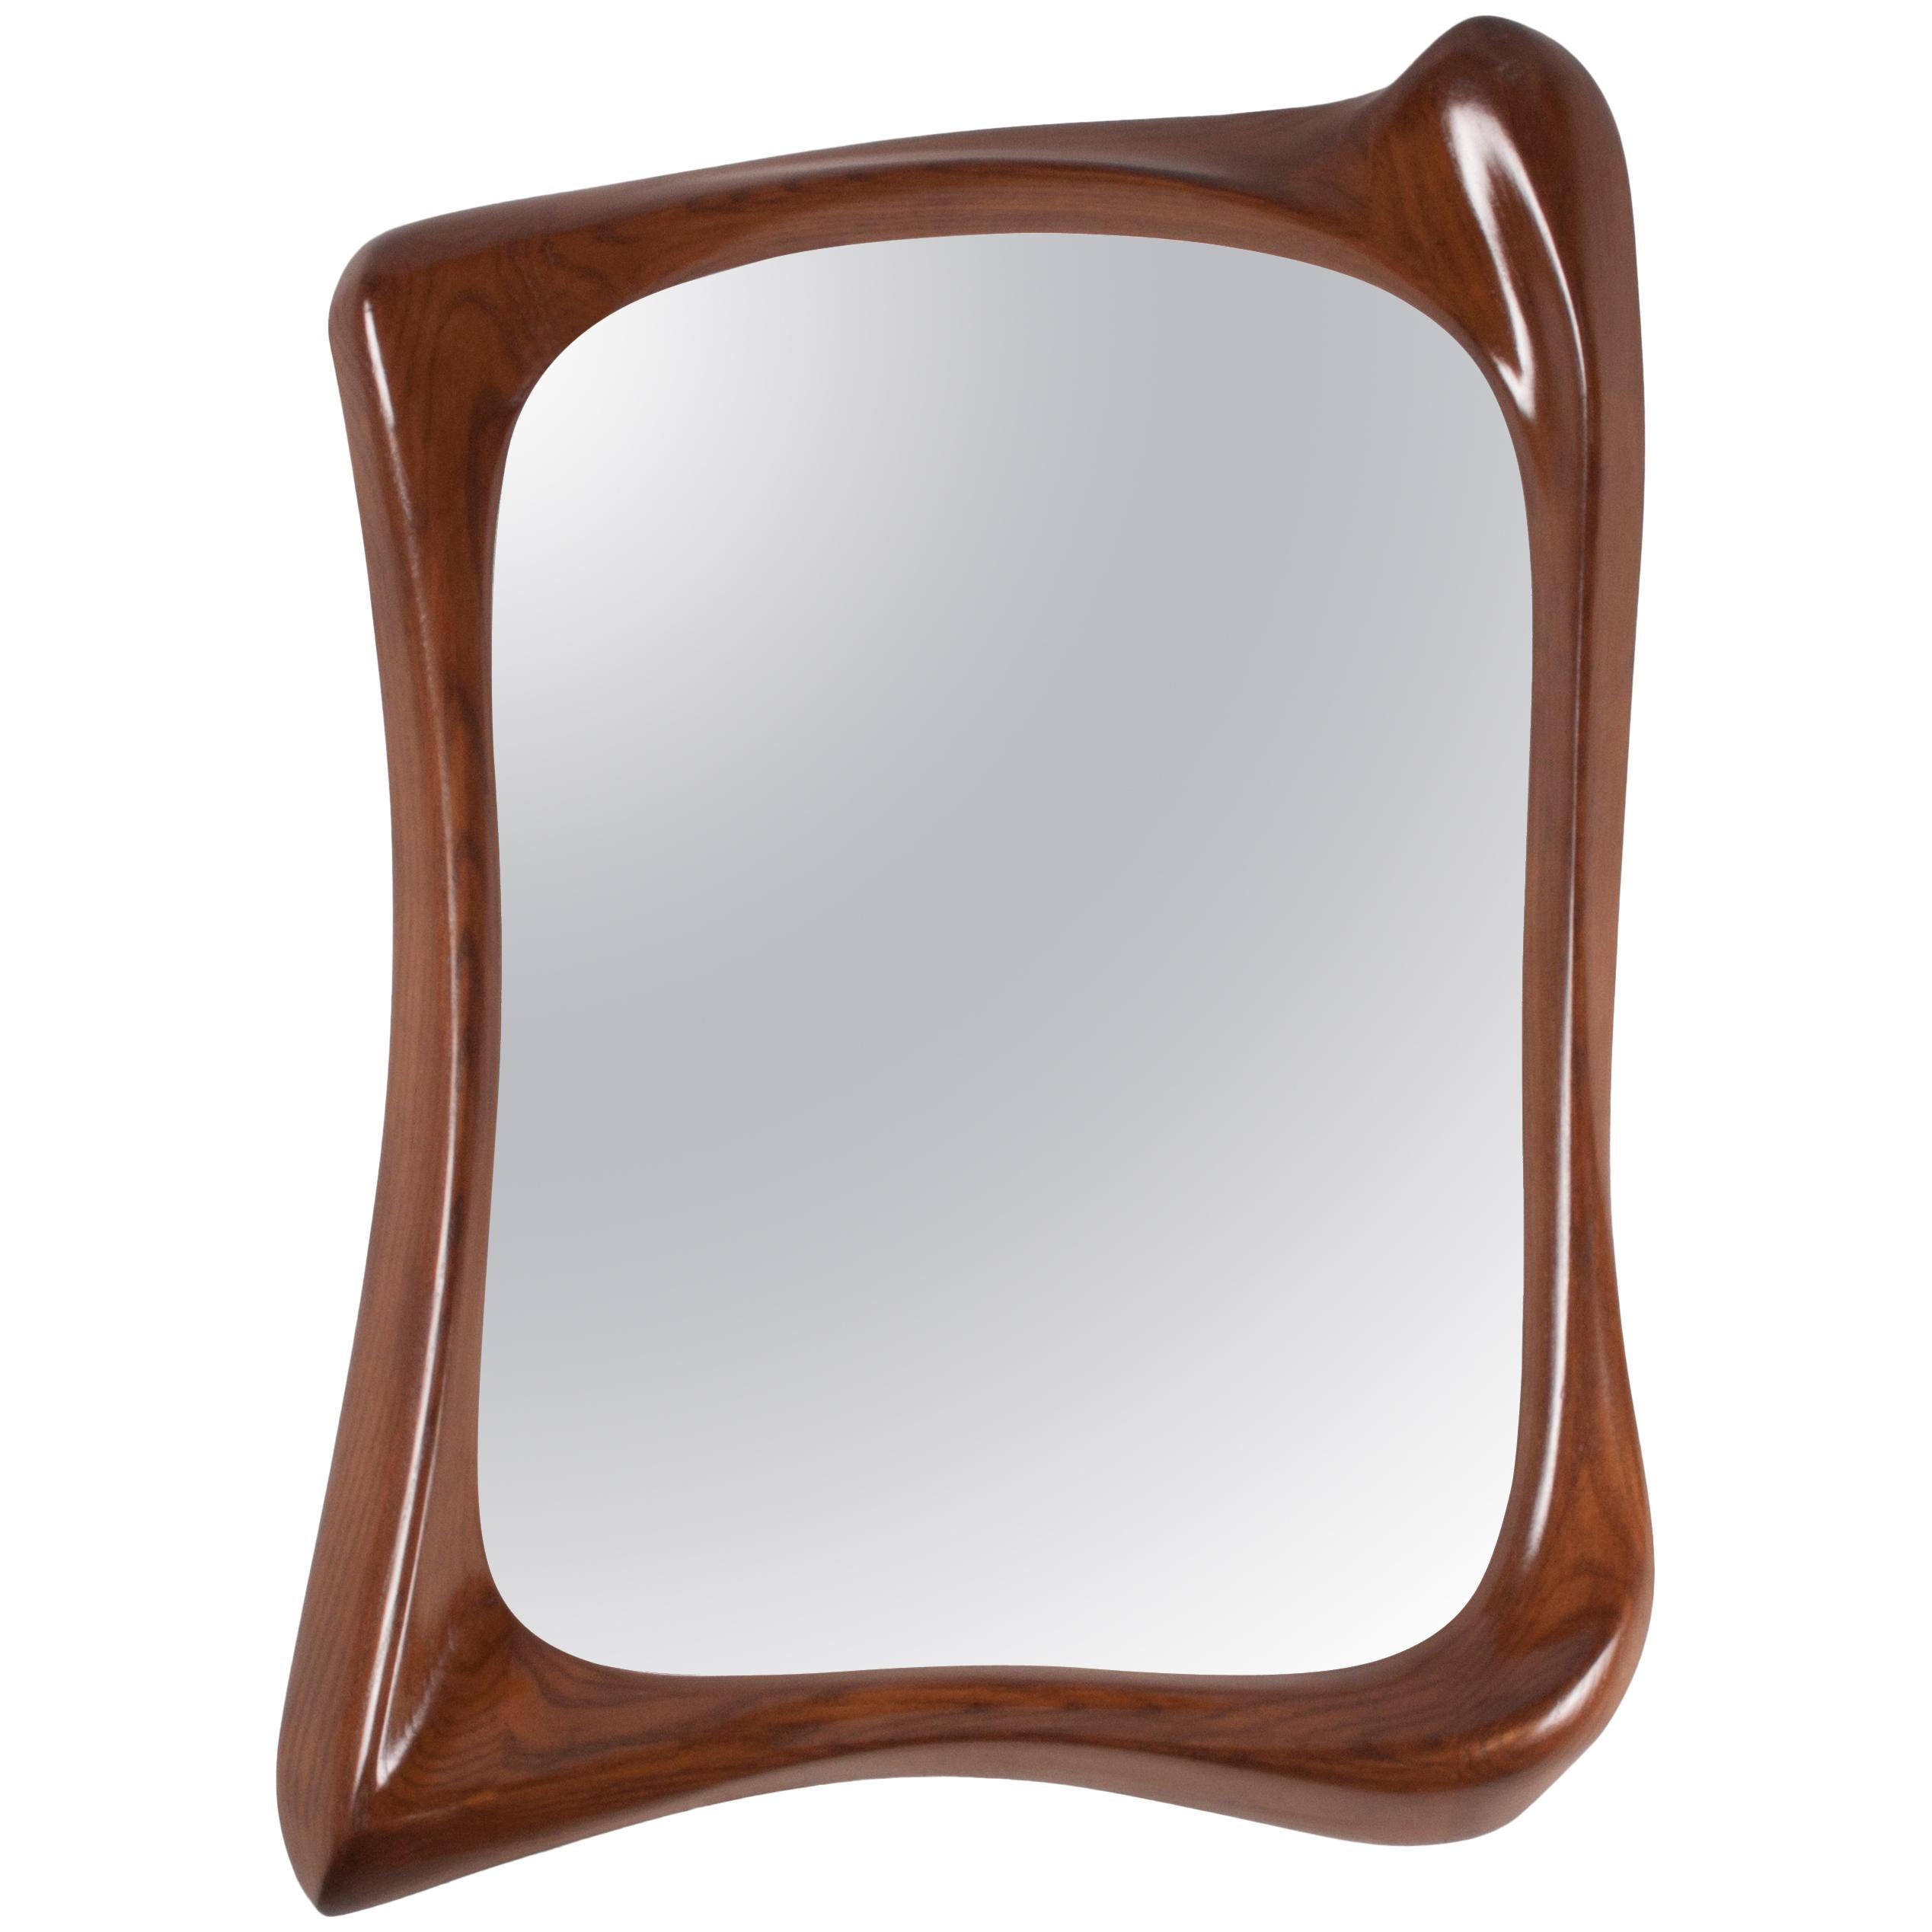 Amorph Narcissus Mirror Walnut stain on Ash wood  For Sale